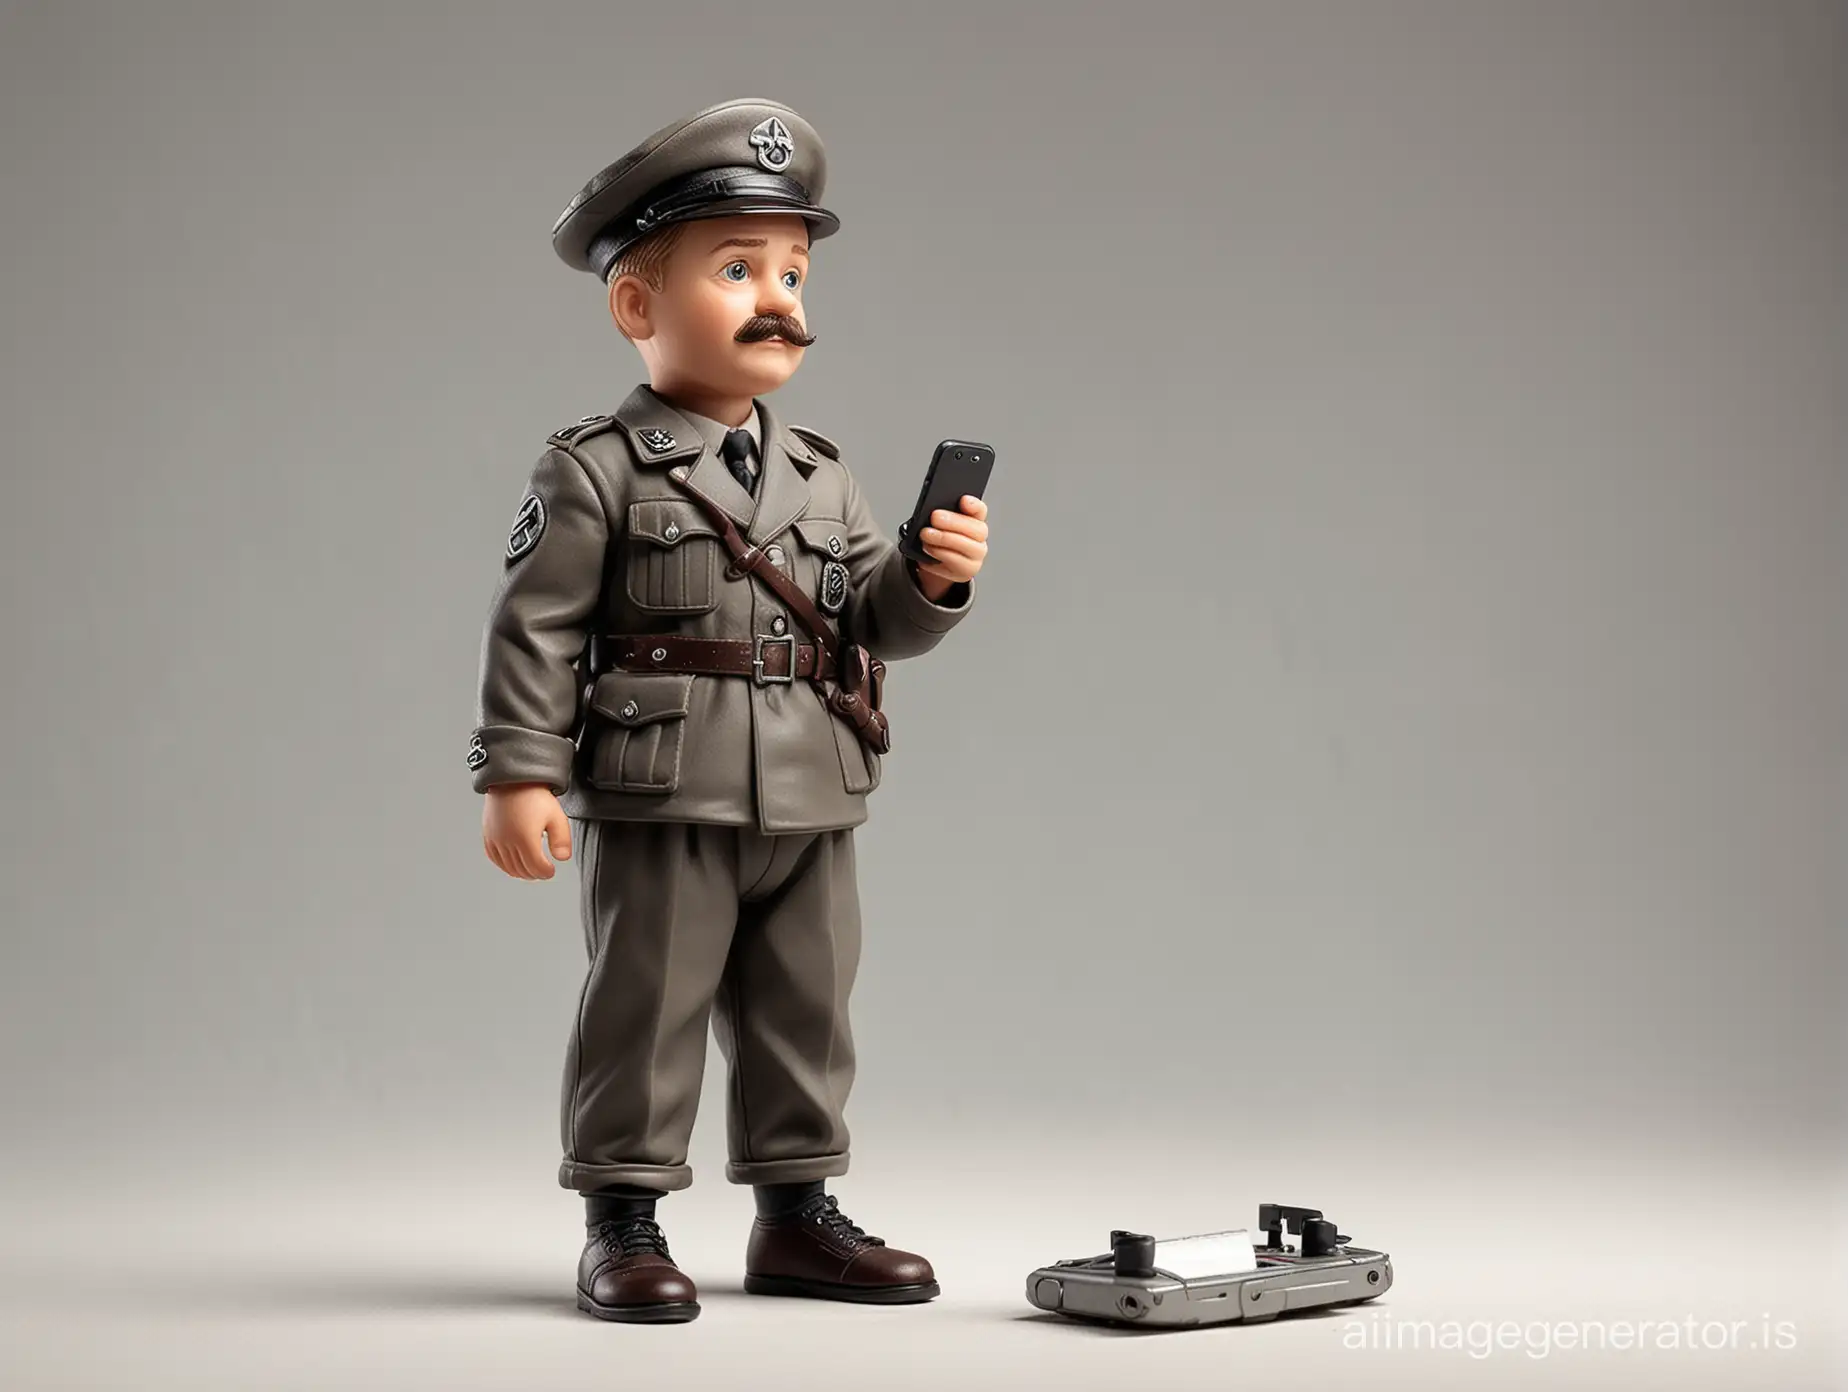 Child-with-Vintage-Mustache-Toy-Focused-on-Smartphone